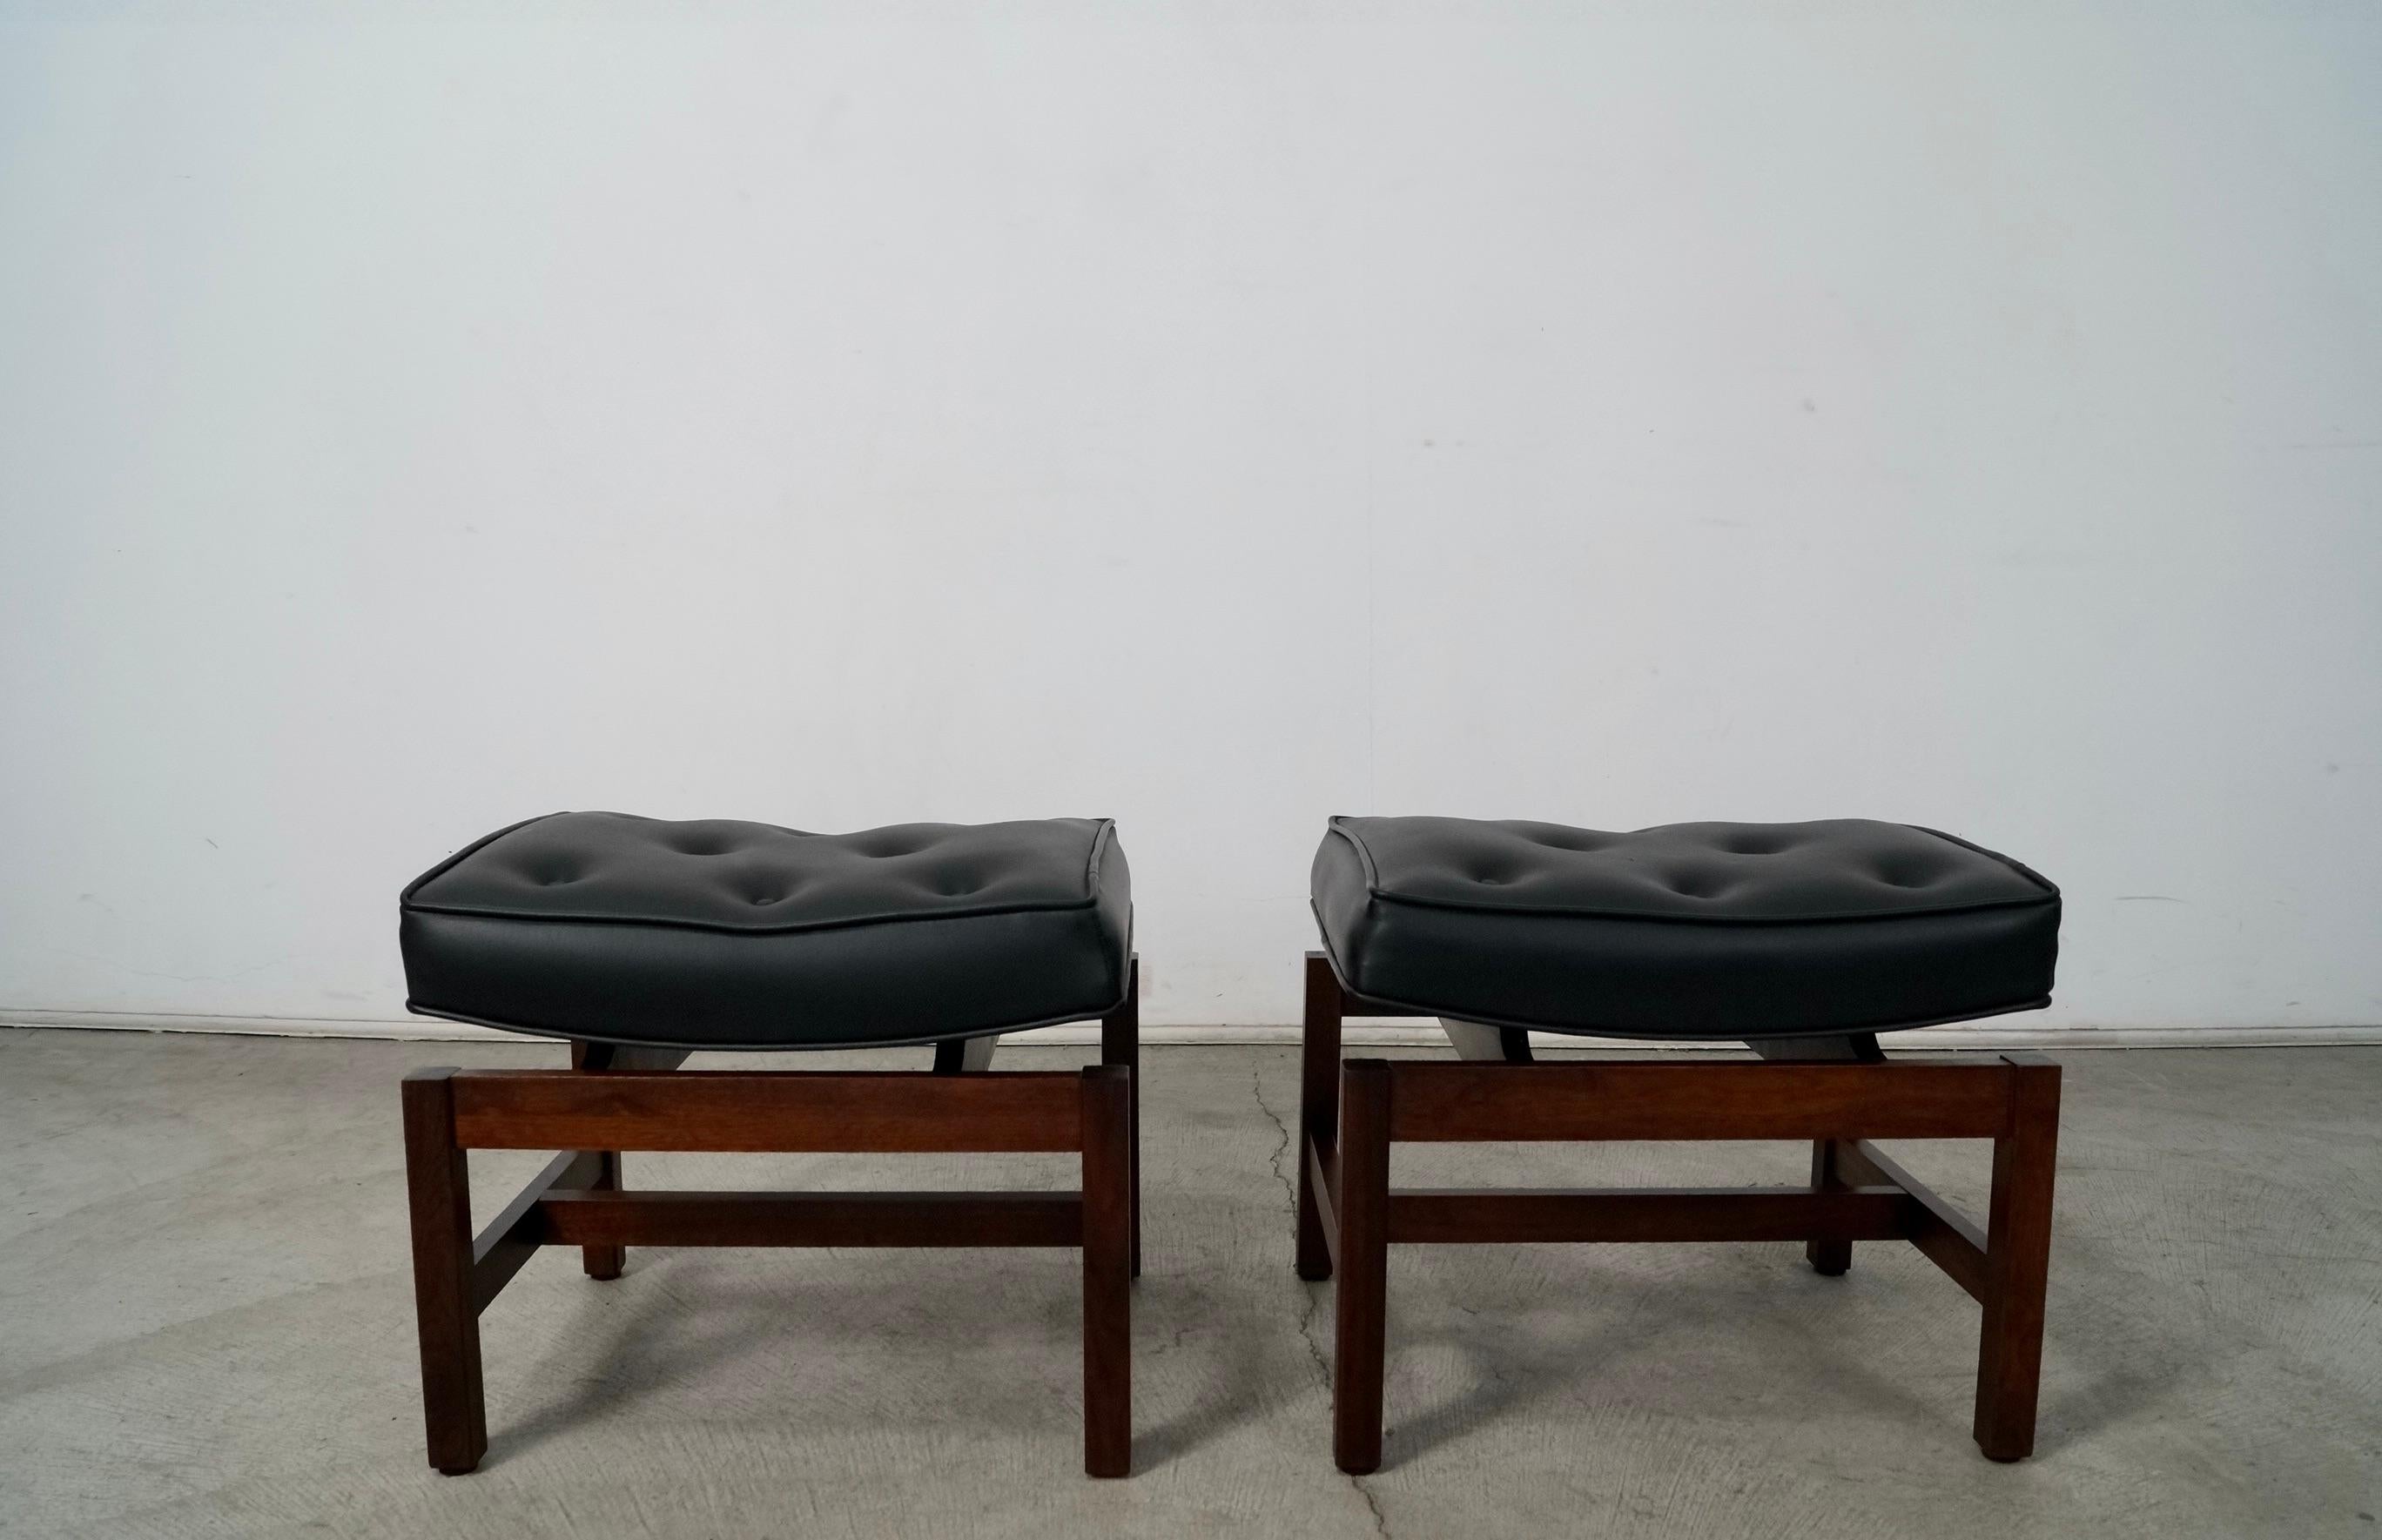 Pair of original Midcentury Danish Modern floating benches for sale. They were designed by Jens Risom, and are in excellent condition. They have a solid walnut sculptural base with a floating top. The original upholstery is a black naugahyde faux